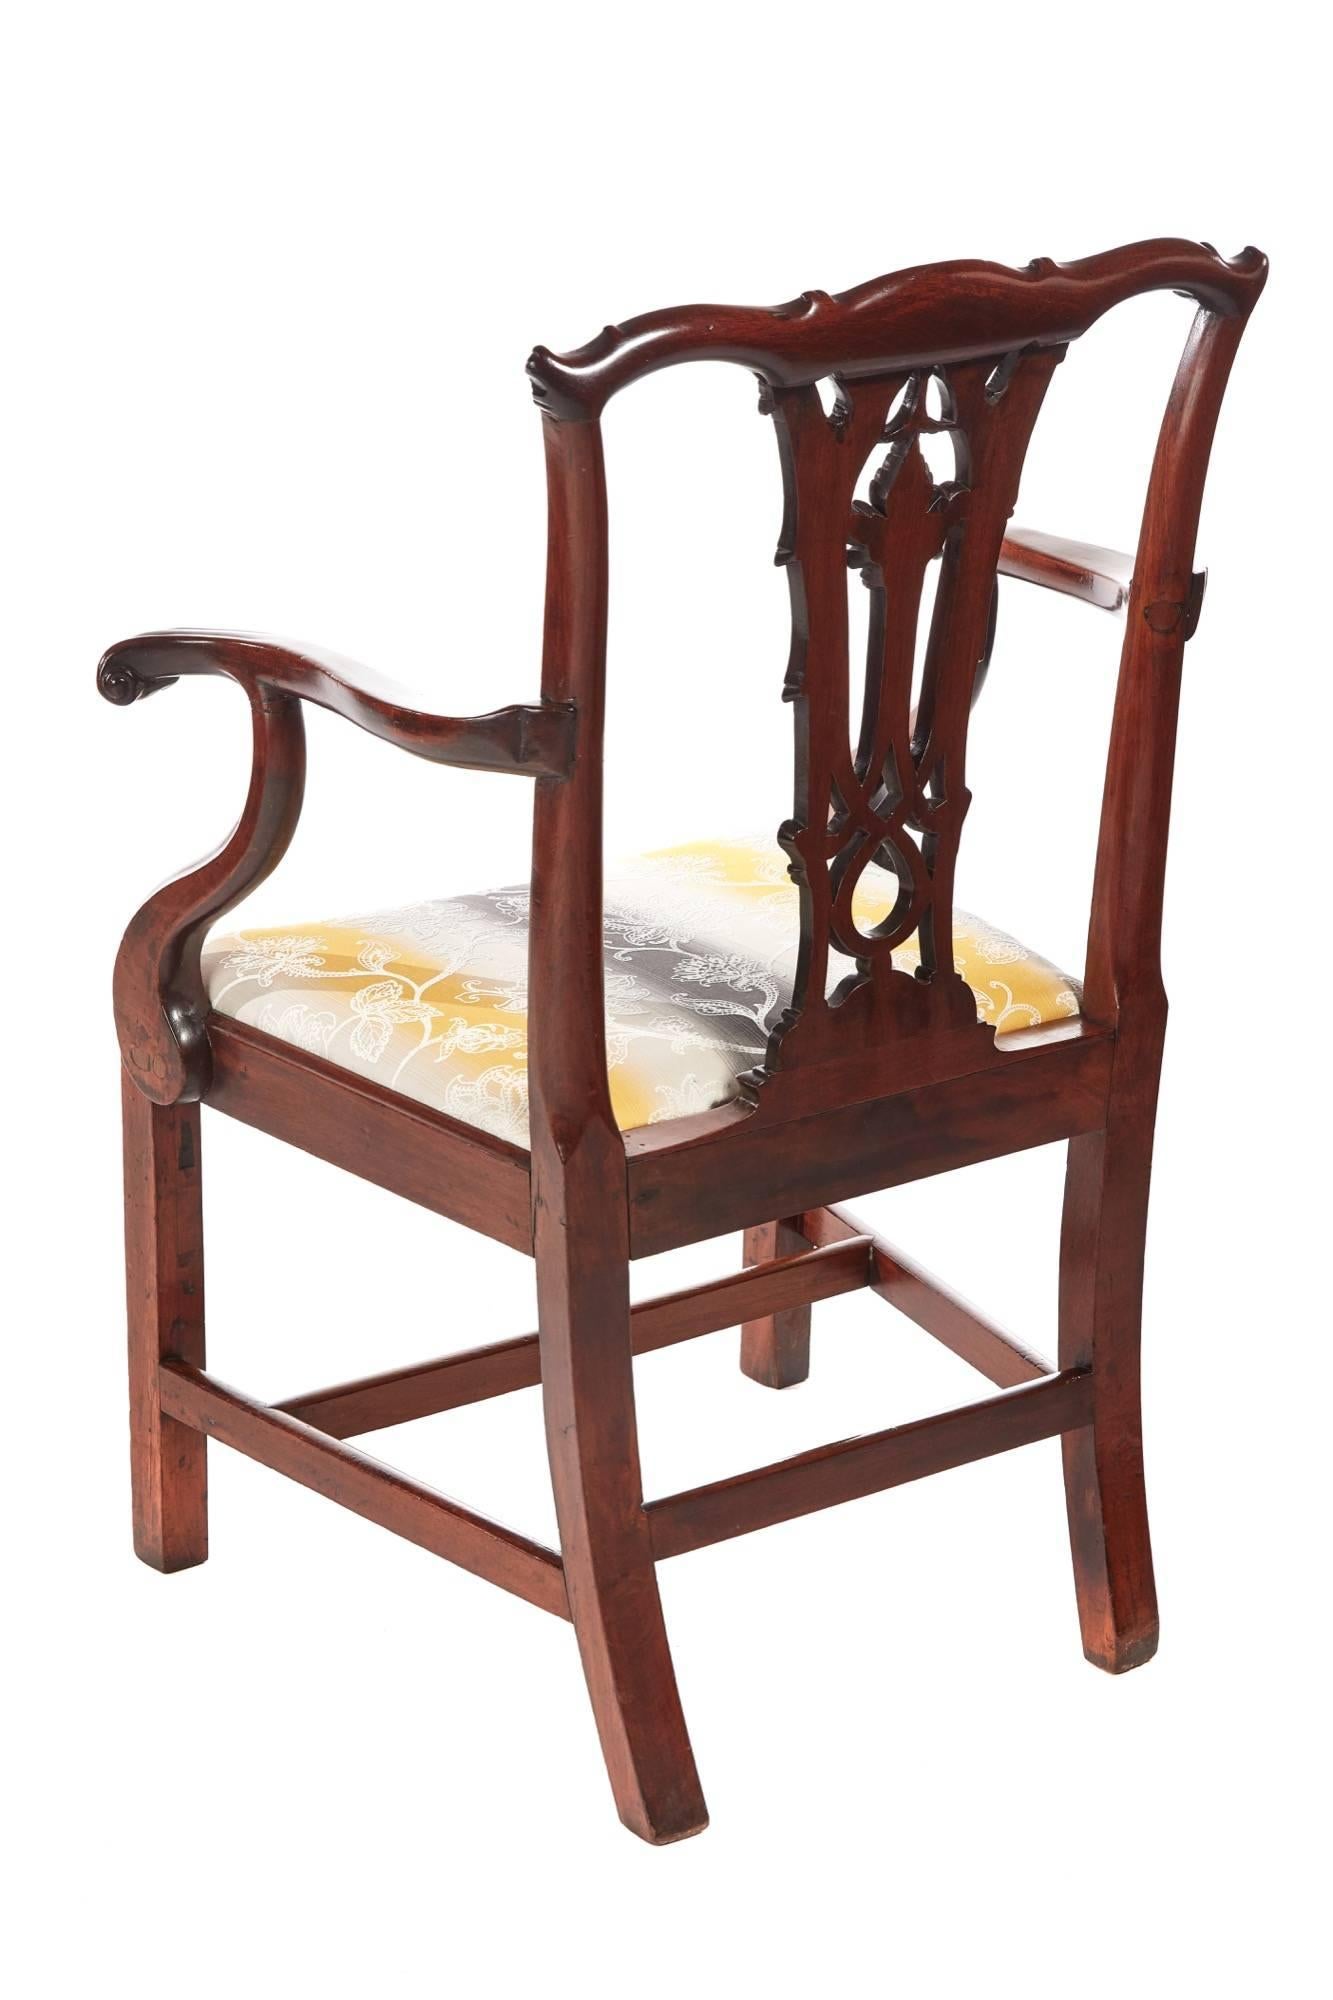 George III mahogany elbow/desk chair, with a shaped carved top rail and open lattice work splat, shaped open arms, newly recovered drop in seat, standing on square moulded legs to the front outswept back legs united by four stretchers
Lovely color